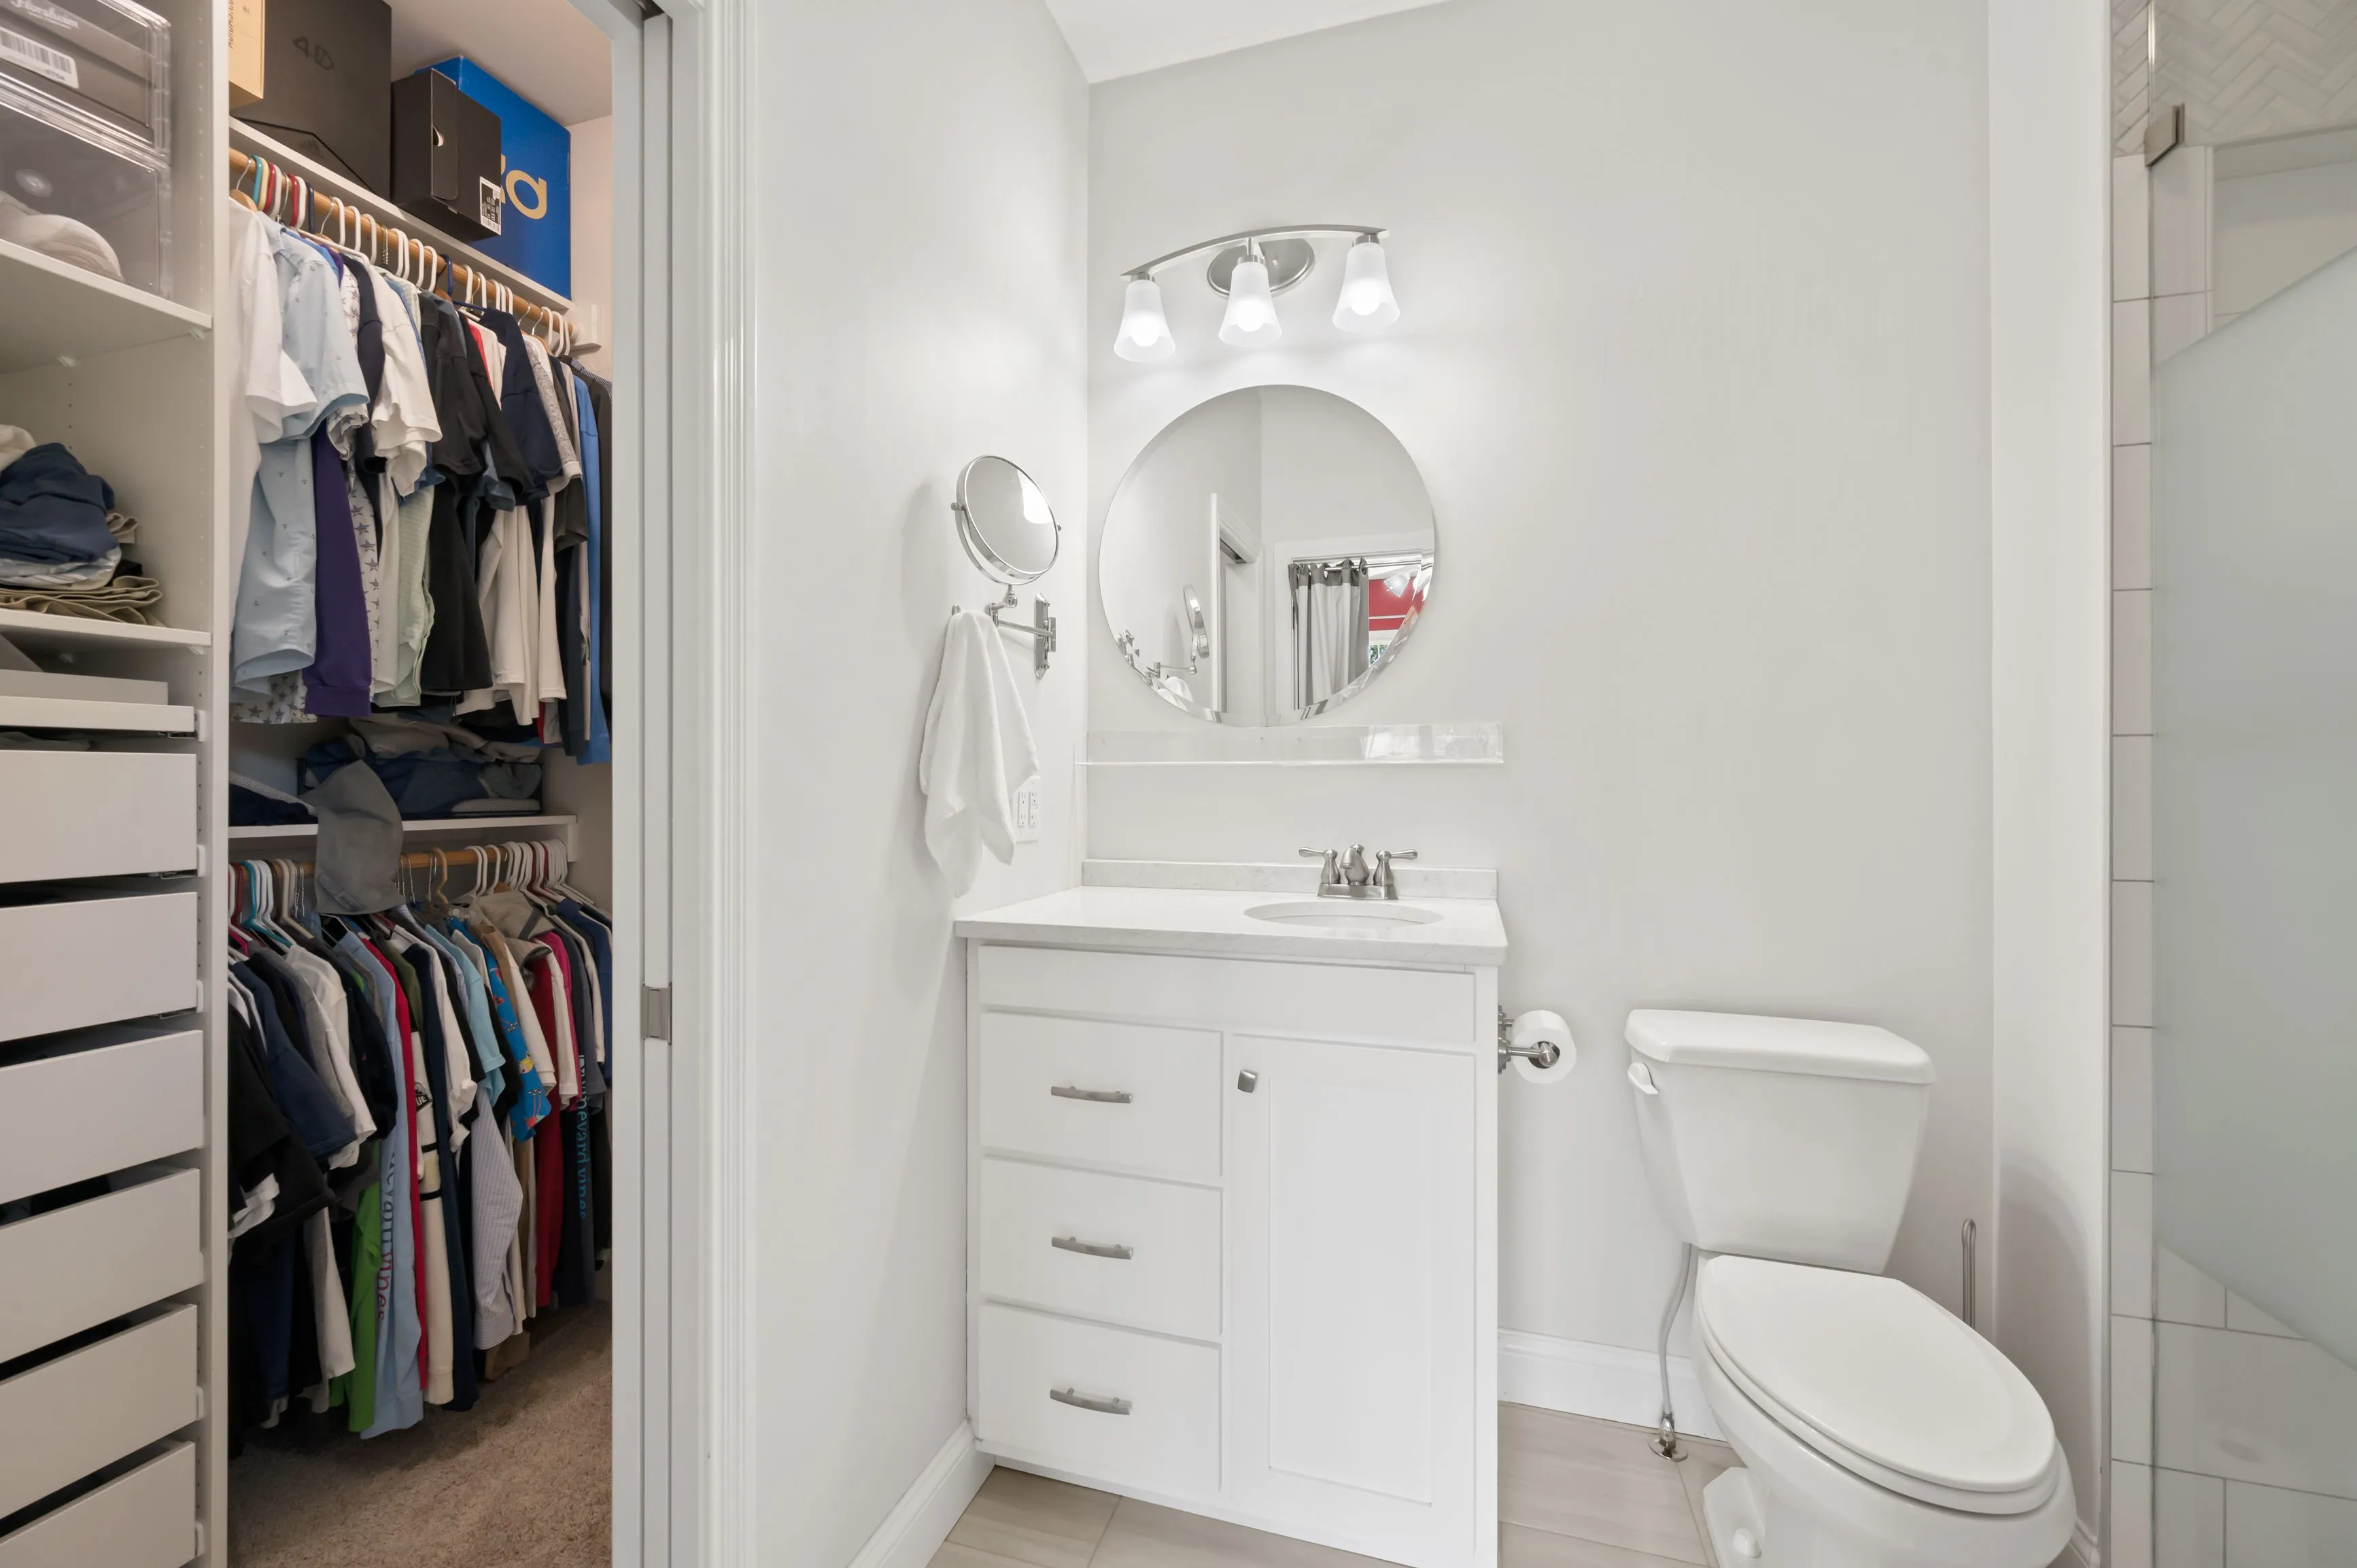 Interior view of a modern bathroom with a white vanity sink, mirror, and toilet, adjacent to a walking closet with shelves and clothes.